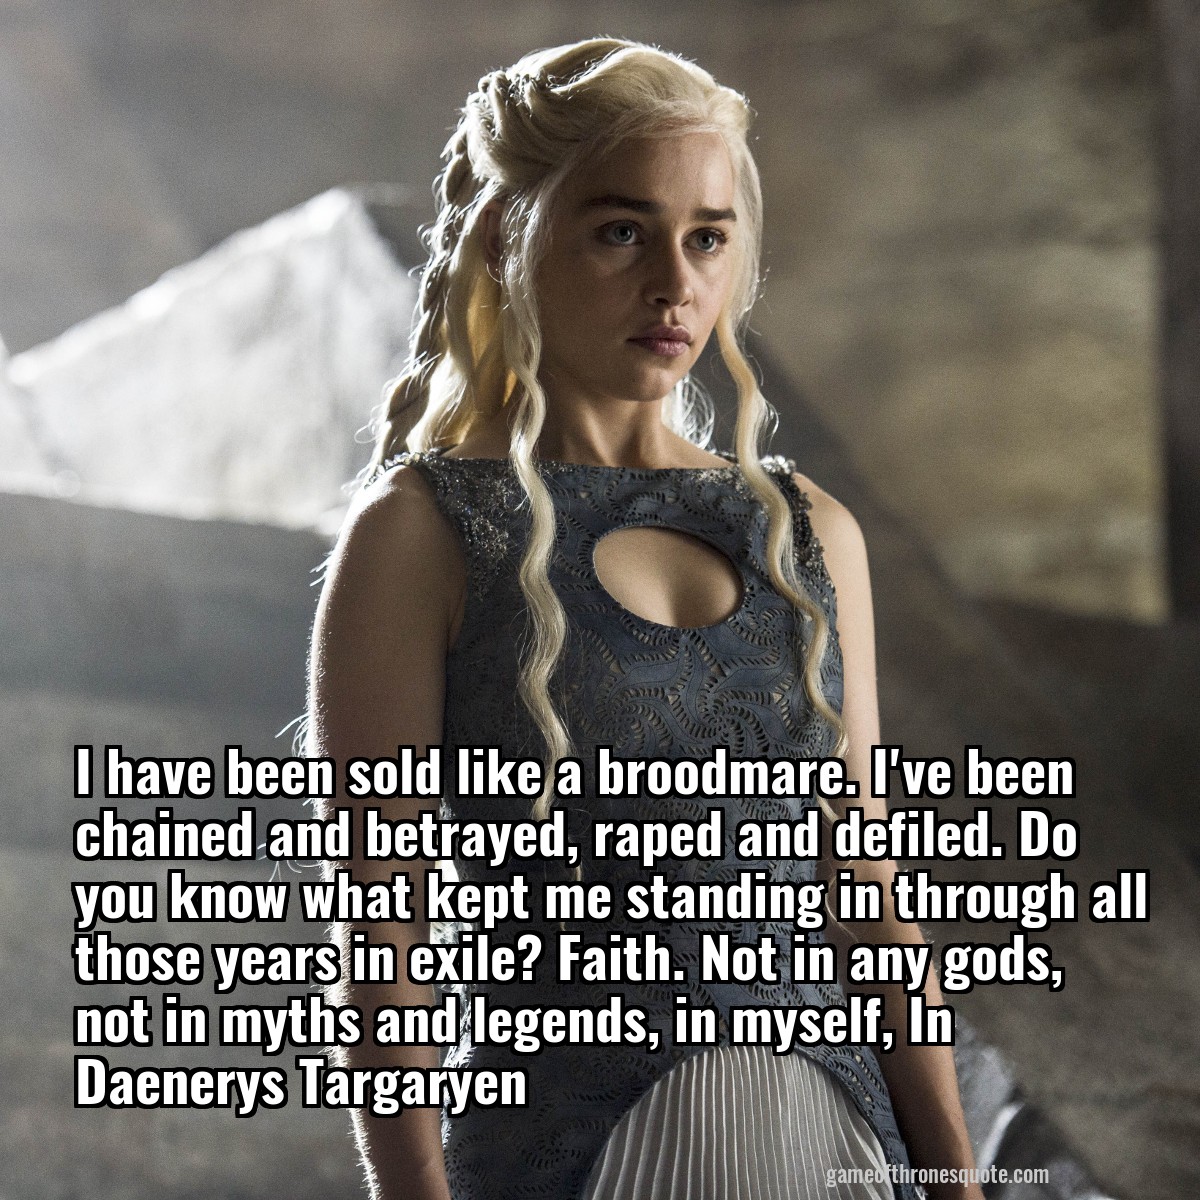 I have been sold like a broodmare. I've been chained and betrayed, raped and defiled. Do you know what kept me standing in through all those years in exile? Faith. Not in any gods, not in myths and legends, in myself, In Daenerys Targaryen